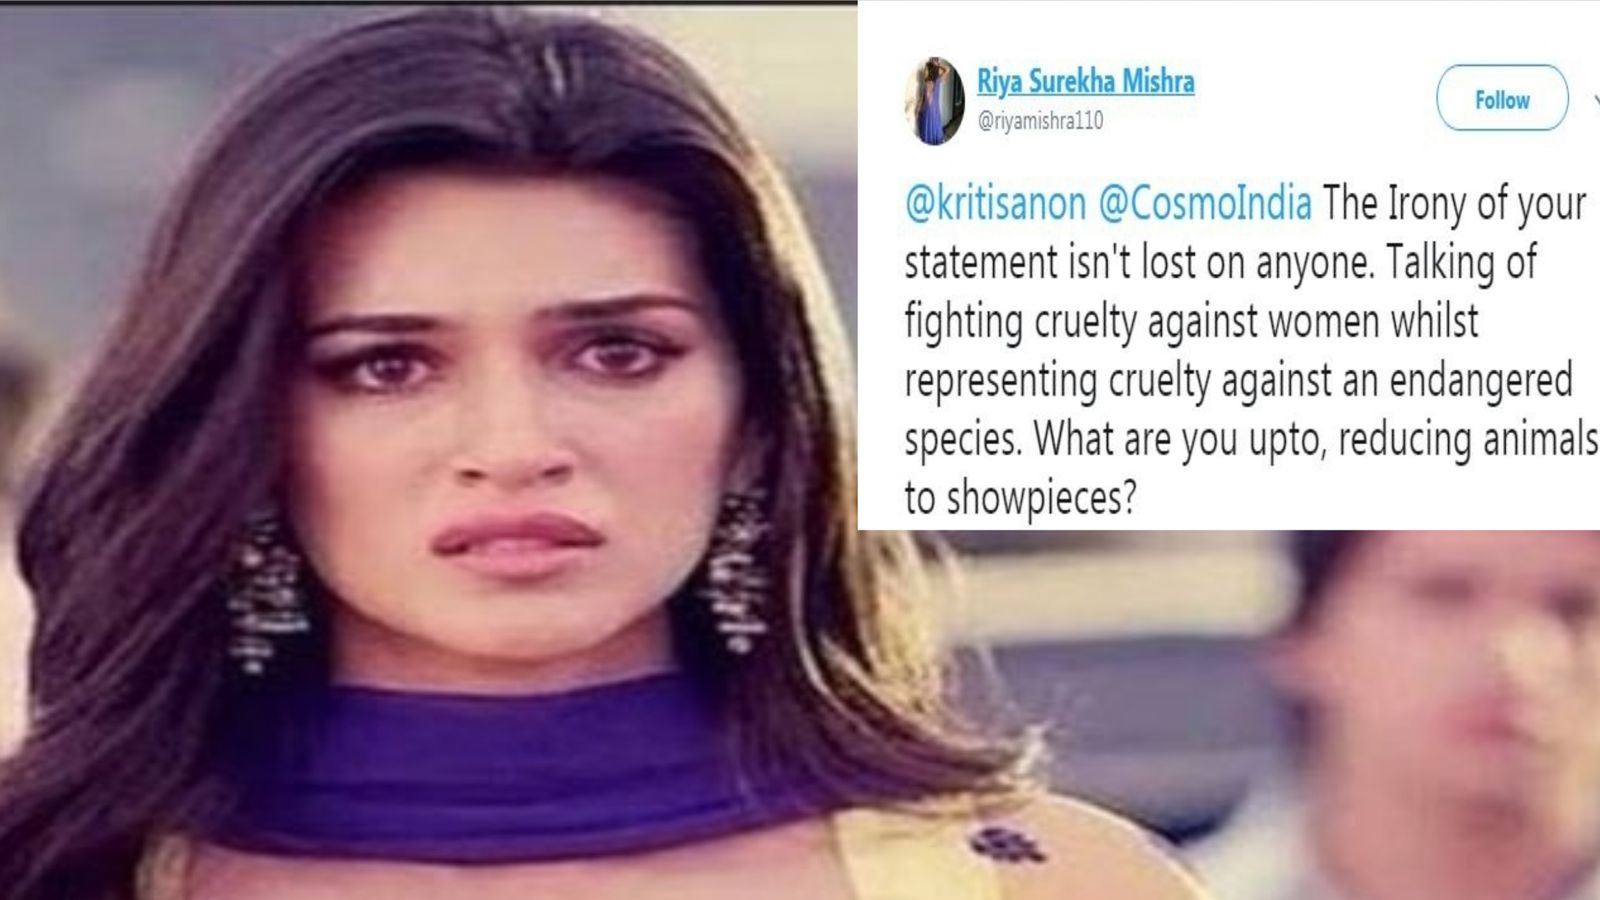 Kriti Sanon Hanging Out With A Giraffe On The Cover Of Cosmopolitan Make Netizens Furious